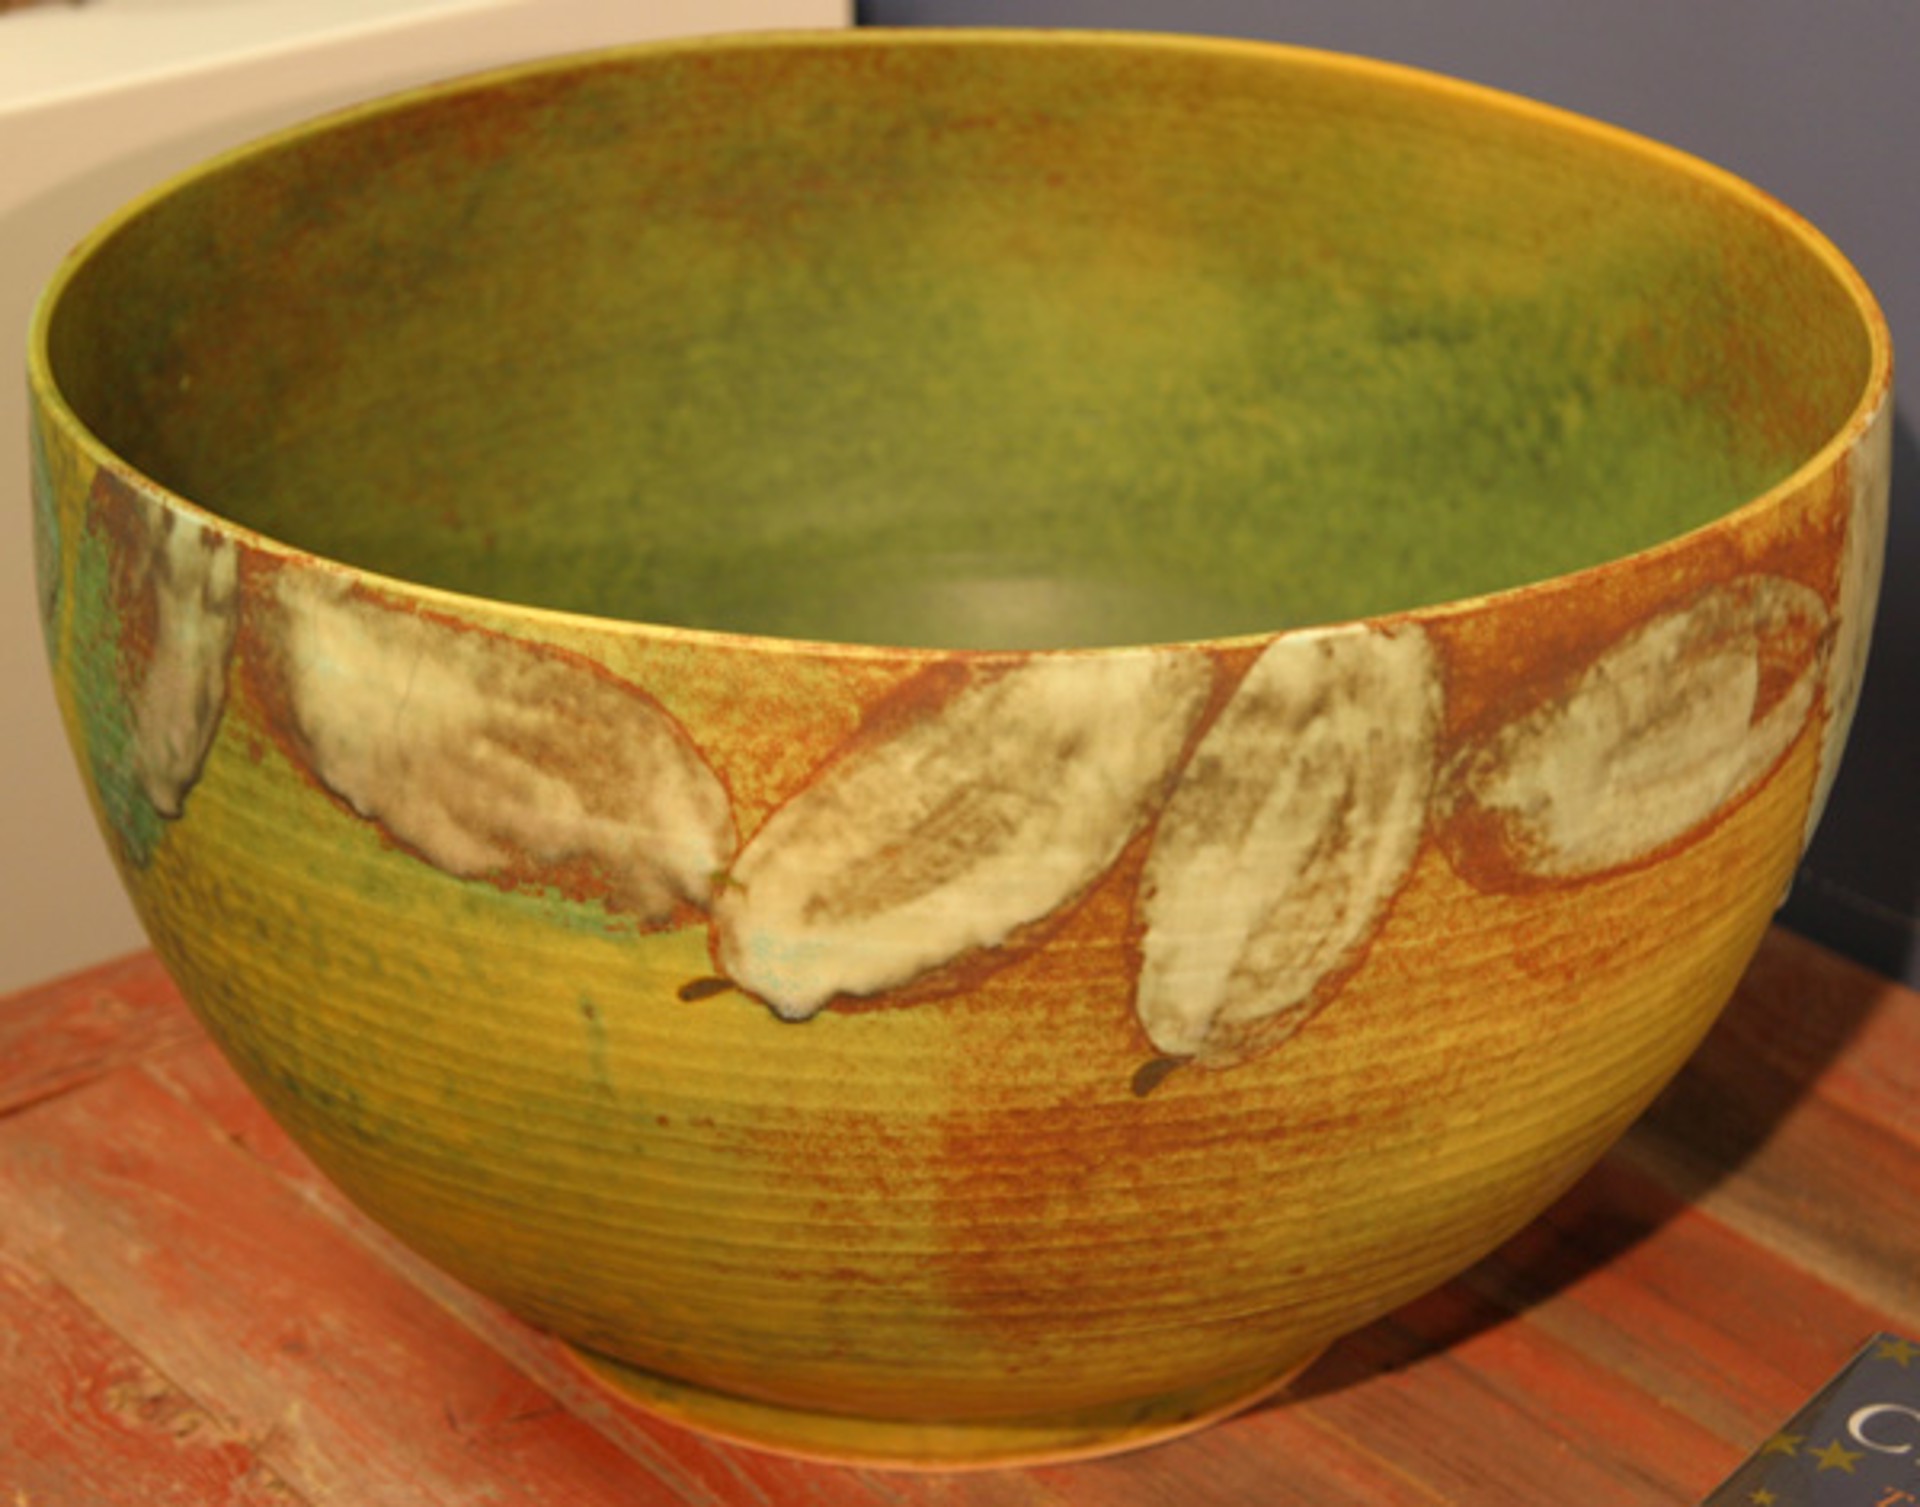 Bowl - Lg, yello green, blue leaves patters around by Kayo O'Young